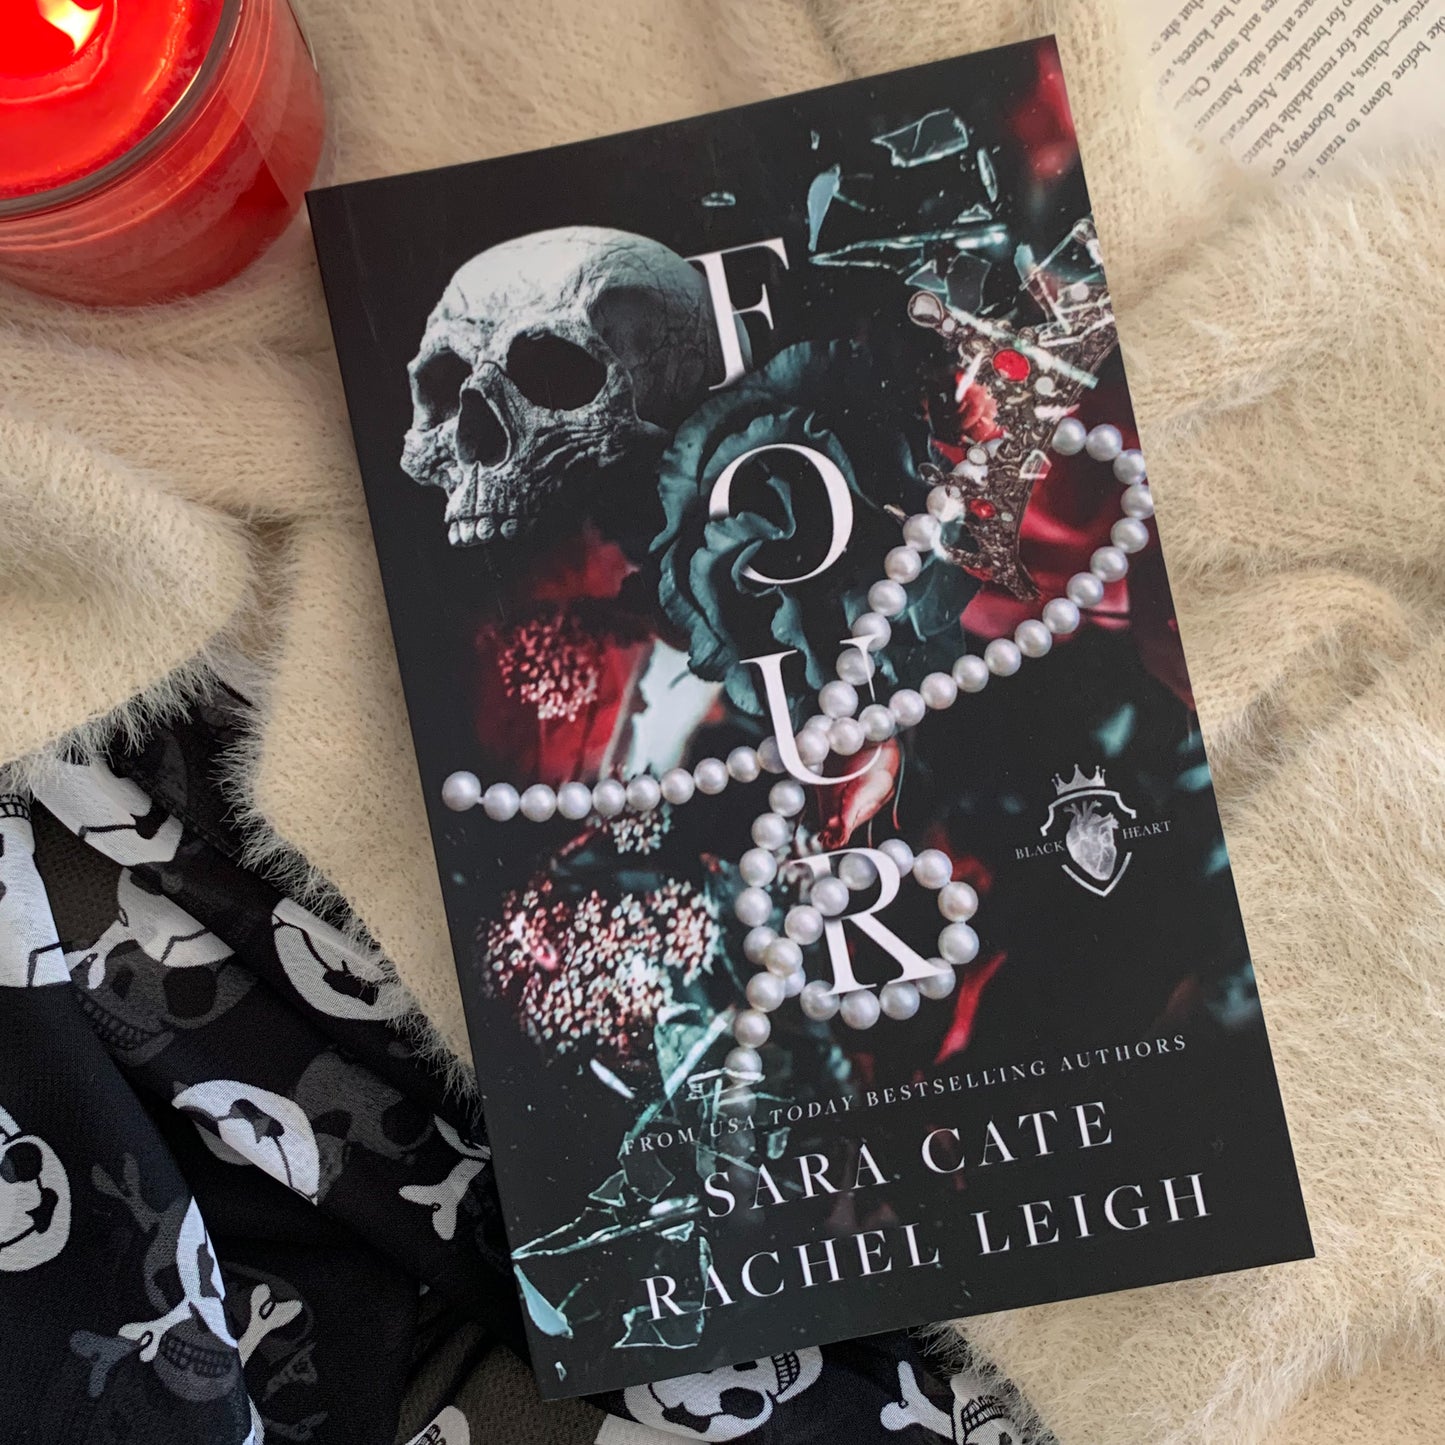 Black Hearts series by Sara Cate and Rachel Leigh